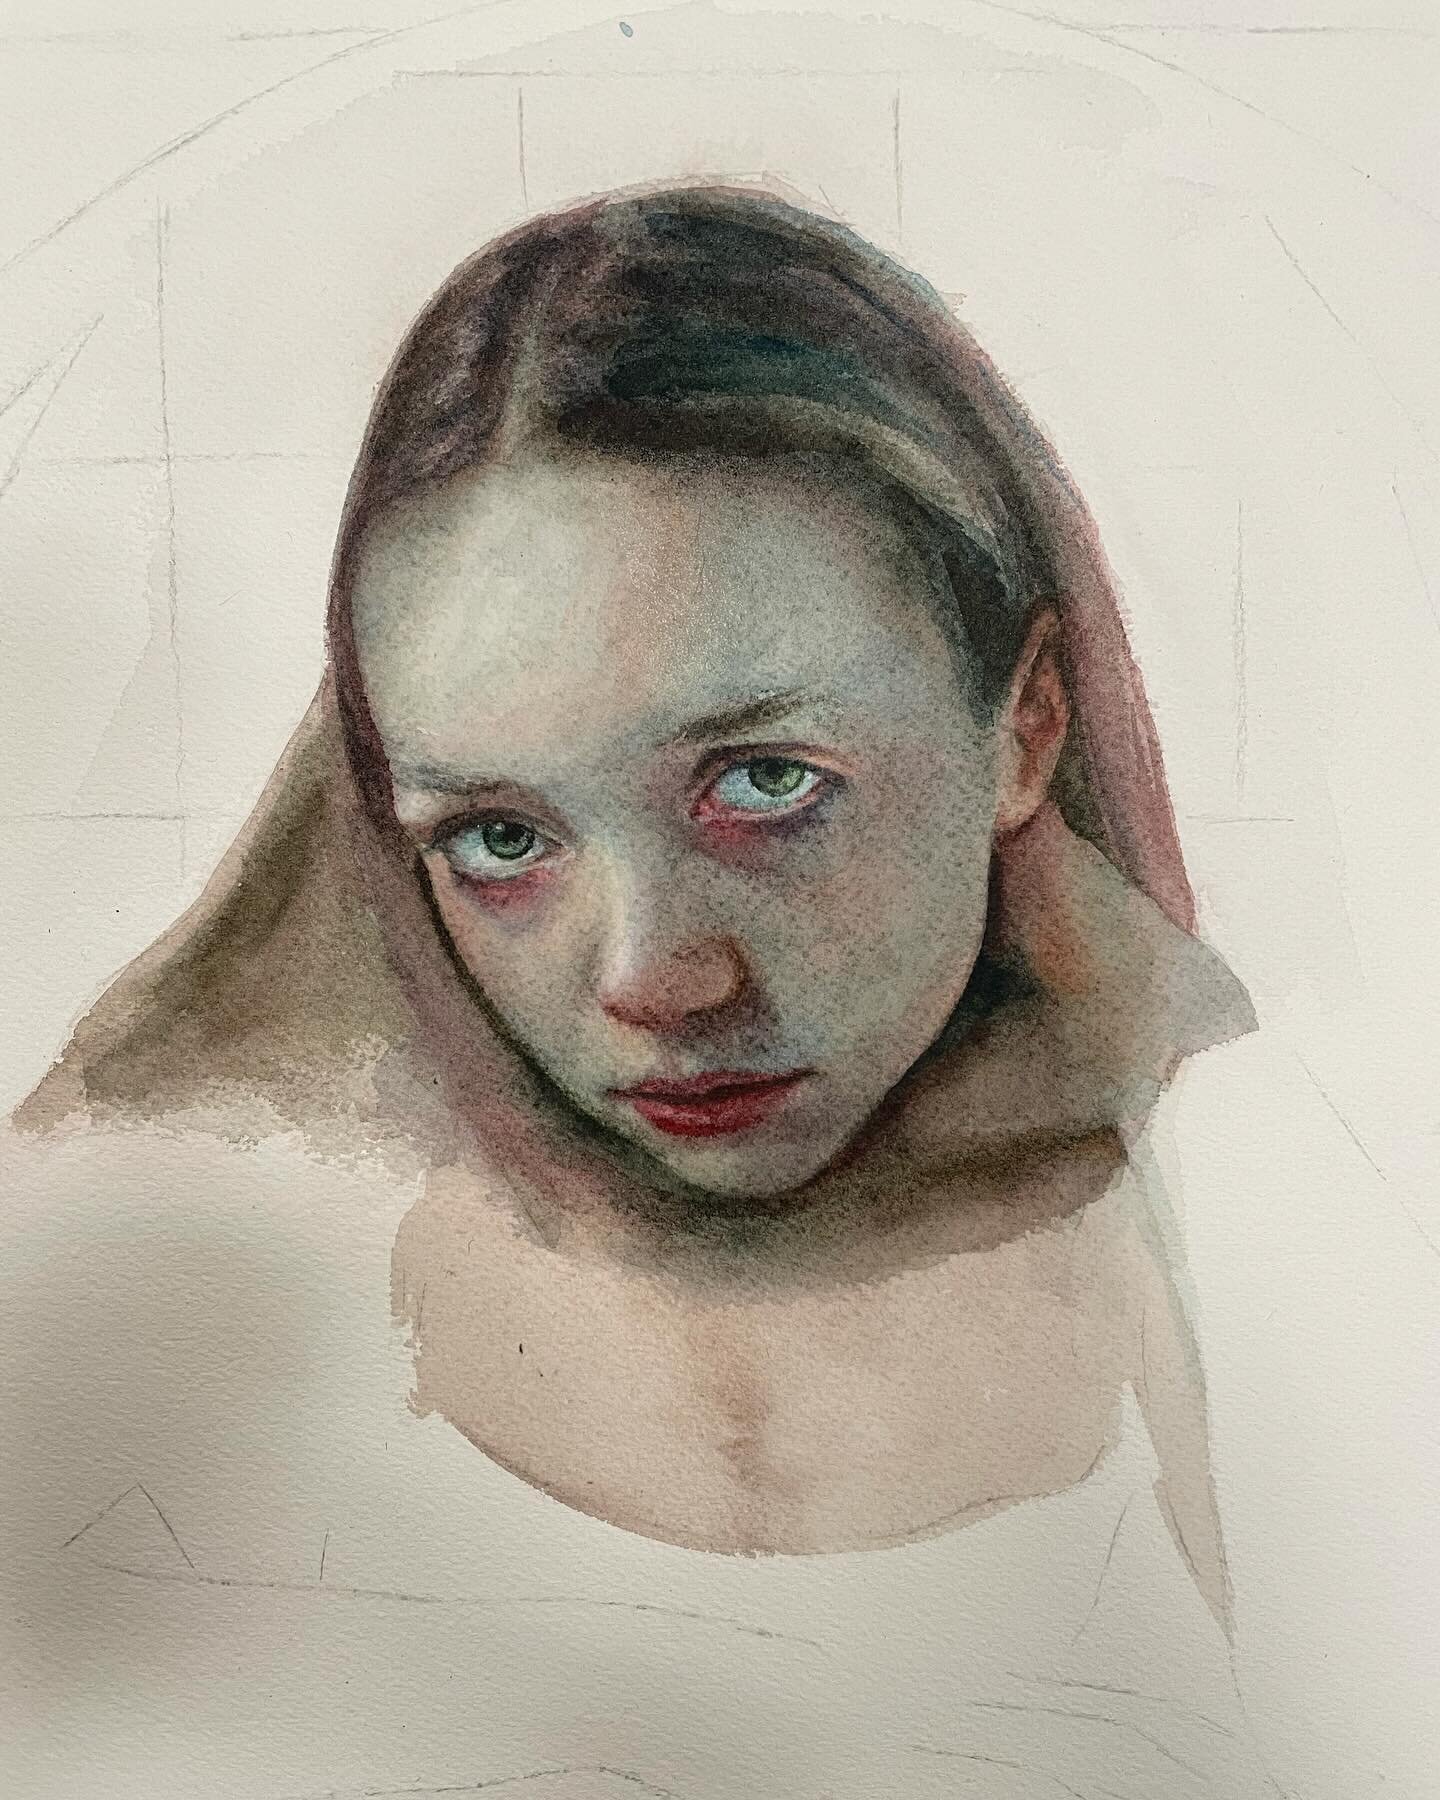 ✧ realizing I only posted a video and not images of this watercolor. Getting ready to paint on another panel from this brand and missing the model rn! @emmaecrespo 
______________
#watercolors #watercolorpainting #watercolorportraits #watercolorportr